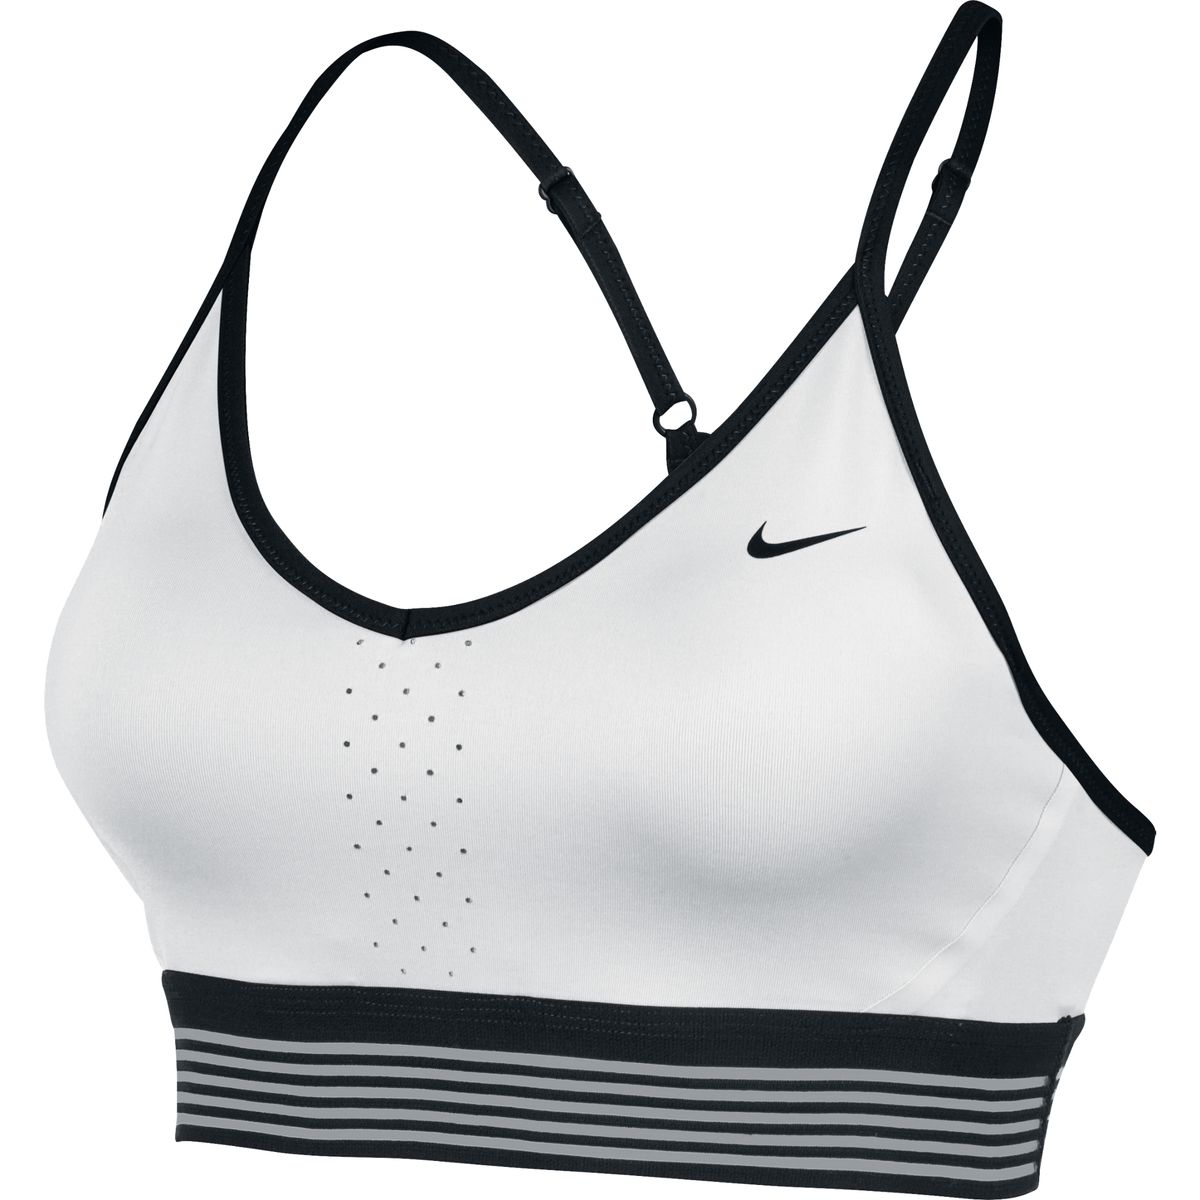 Women's Sports Bra Active, Gym, Sports, Fitness, Workout Clothing